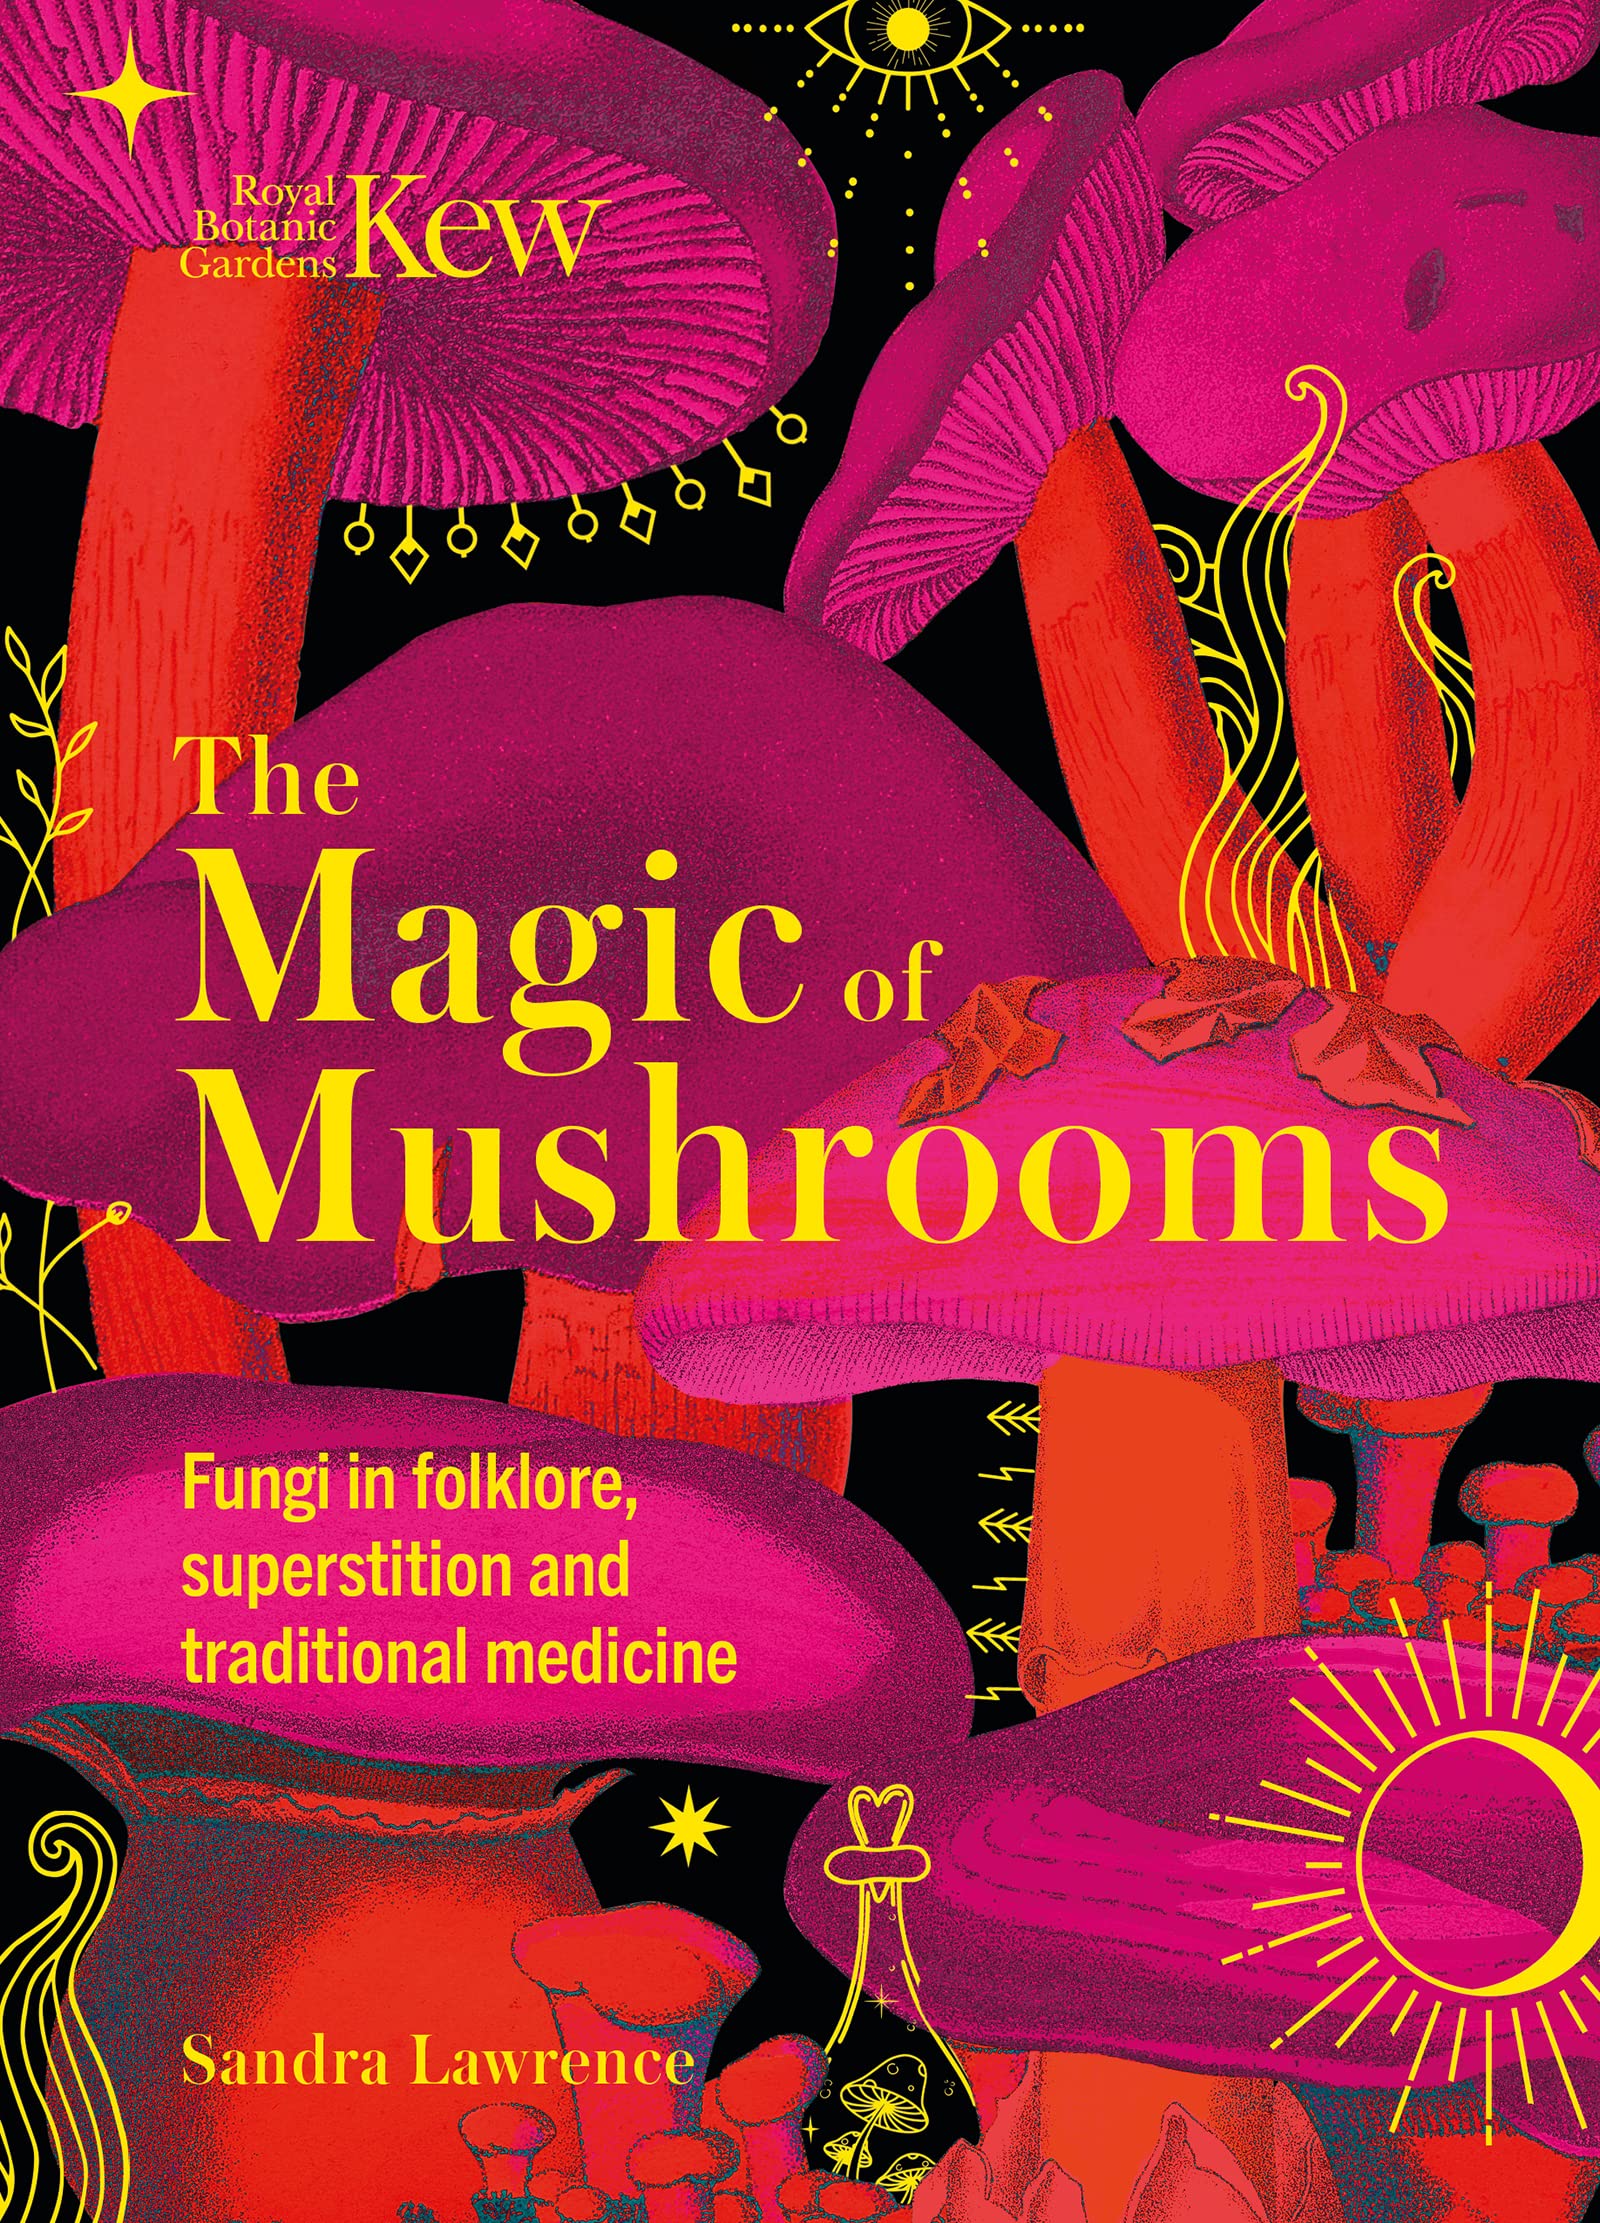 The Magic of Mushrooms: Fungi in folklore, superstition and traditional medicine-hotRAGS.com